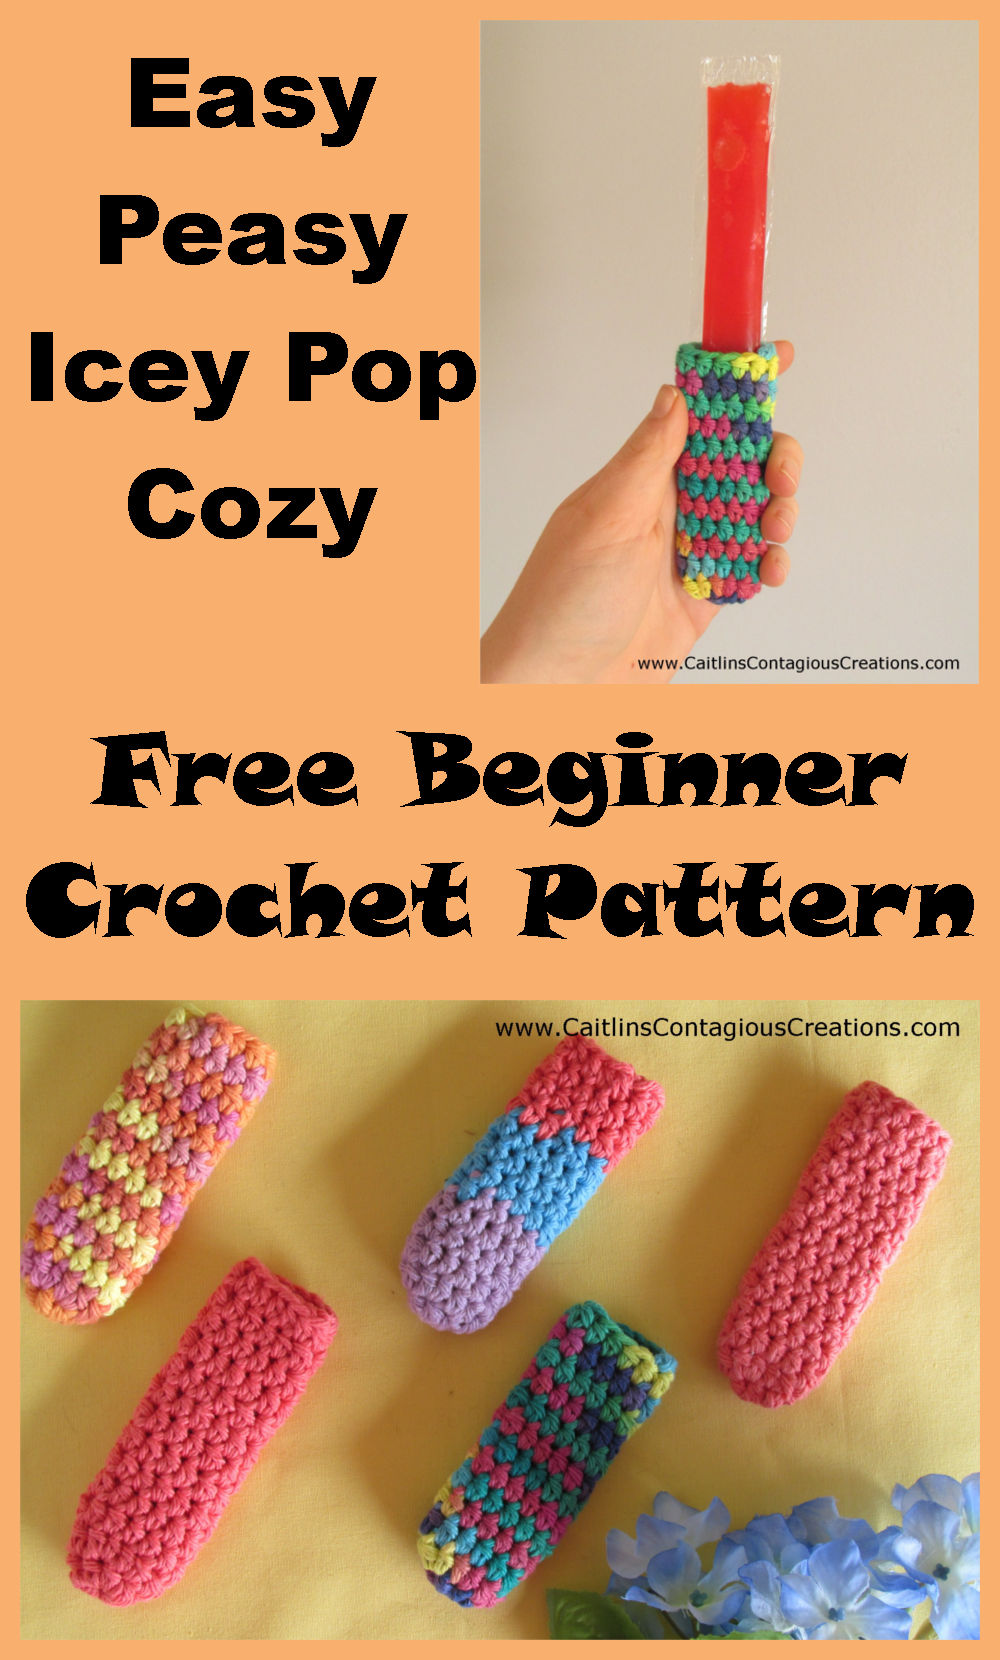 Free Ice Pop Cozy Crochet Pattern from Caitlin's Contagious Creations. Beginner friendly freezer popsicle holder crochet design includes written directions and step by step photos. Make it with machine washable cotton yarn and never have hold or sticky hands again! Make yours today!